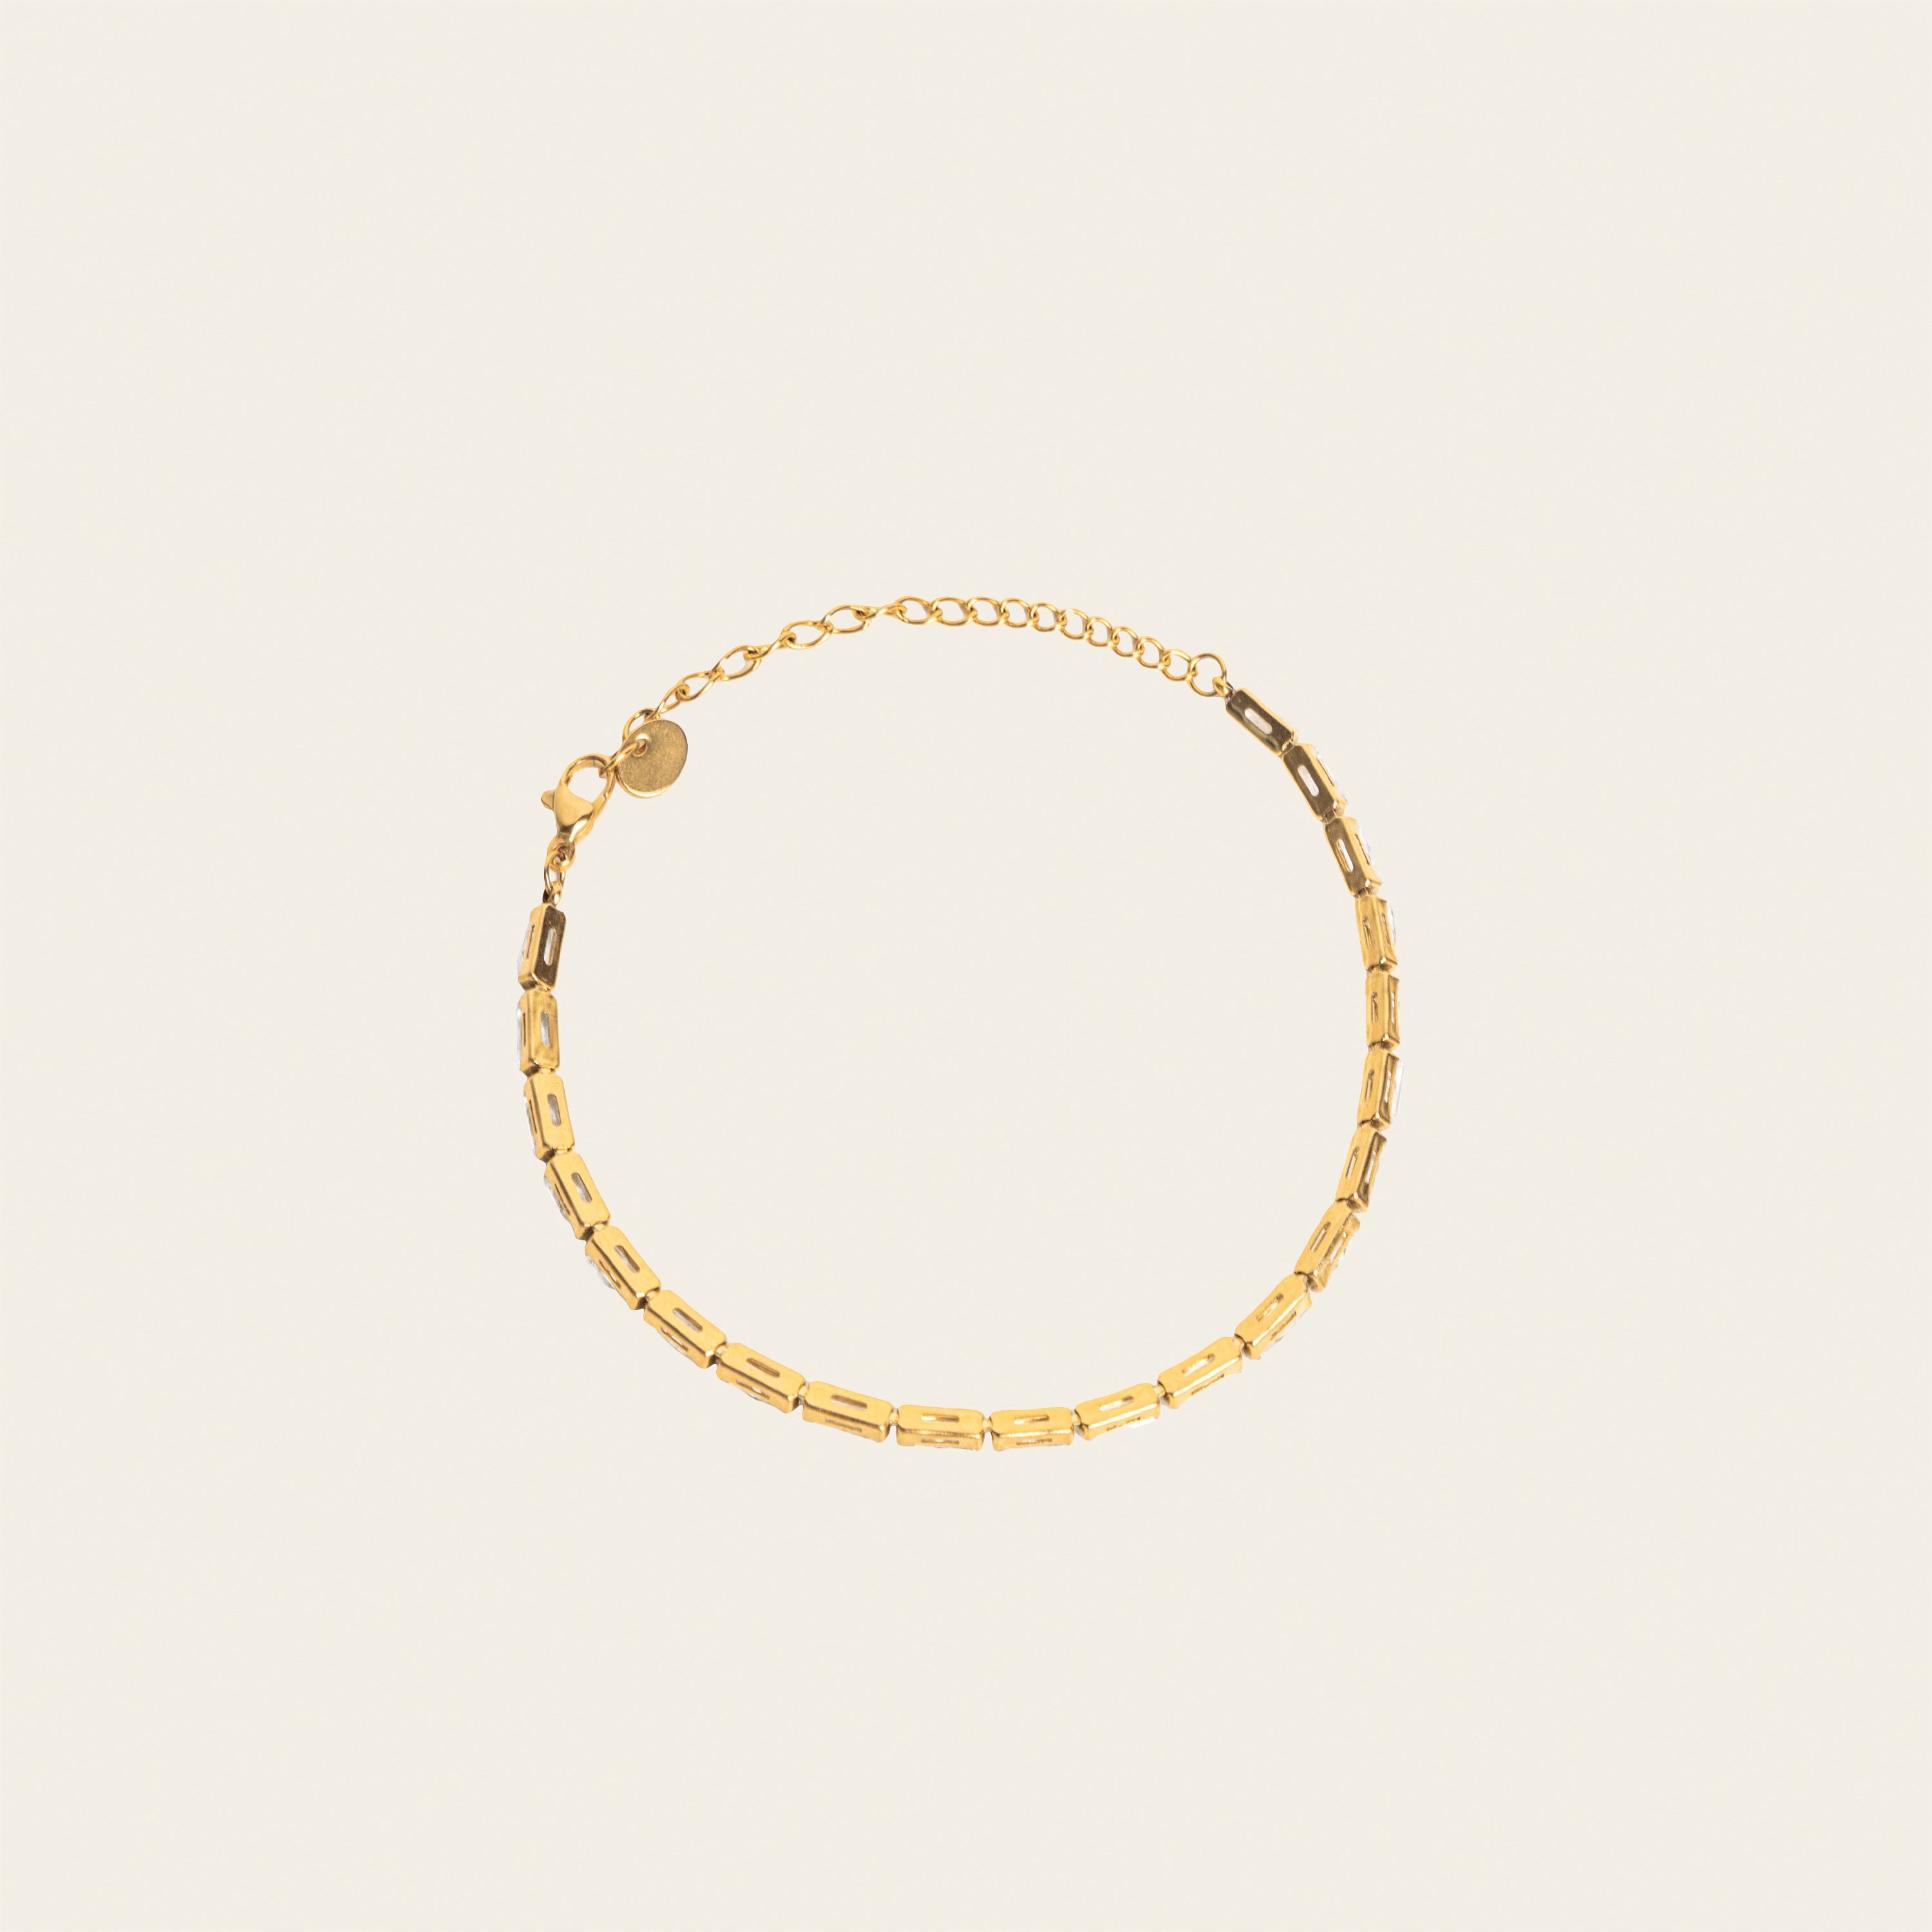 Image of the stunning Elizabeth Bracelet - a perfect blend of fashion and function. With adjustable sizing and 18K gold plated stainless steel, it's both versatile and durable. Enjoy its non-tarnish, water-resistant, and allergy-free properties. Elevate any look with this must-have accessory.